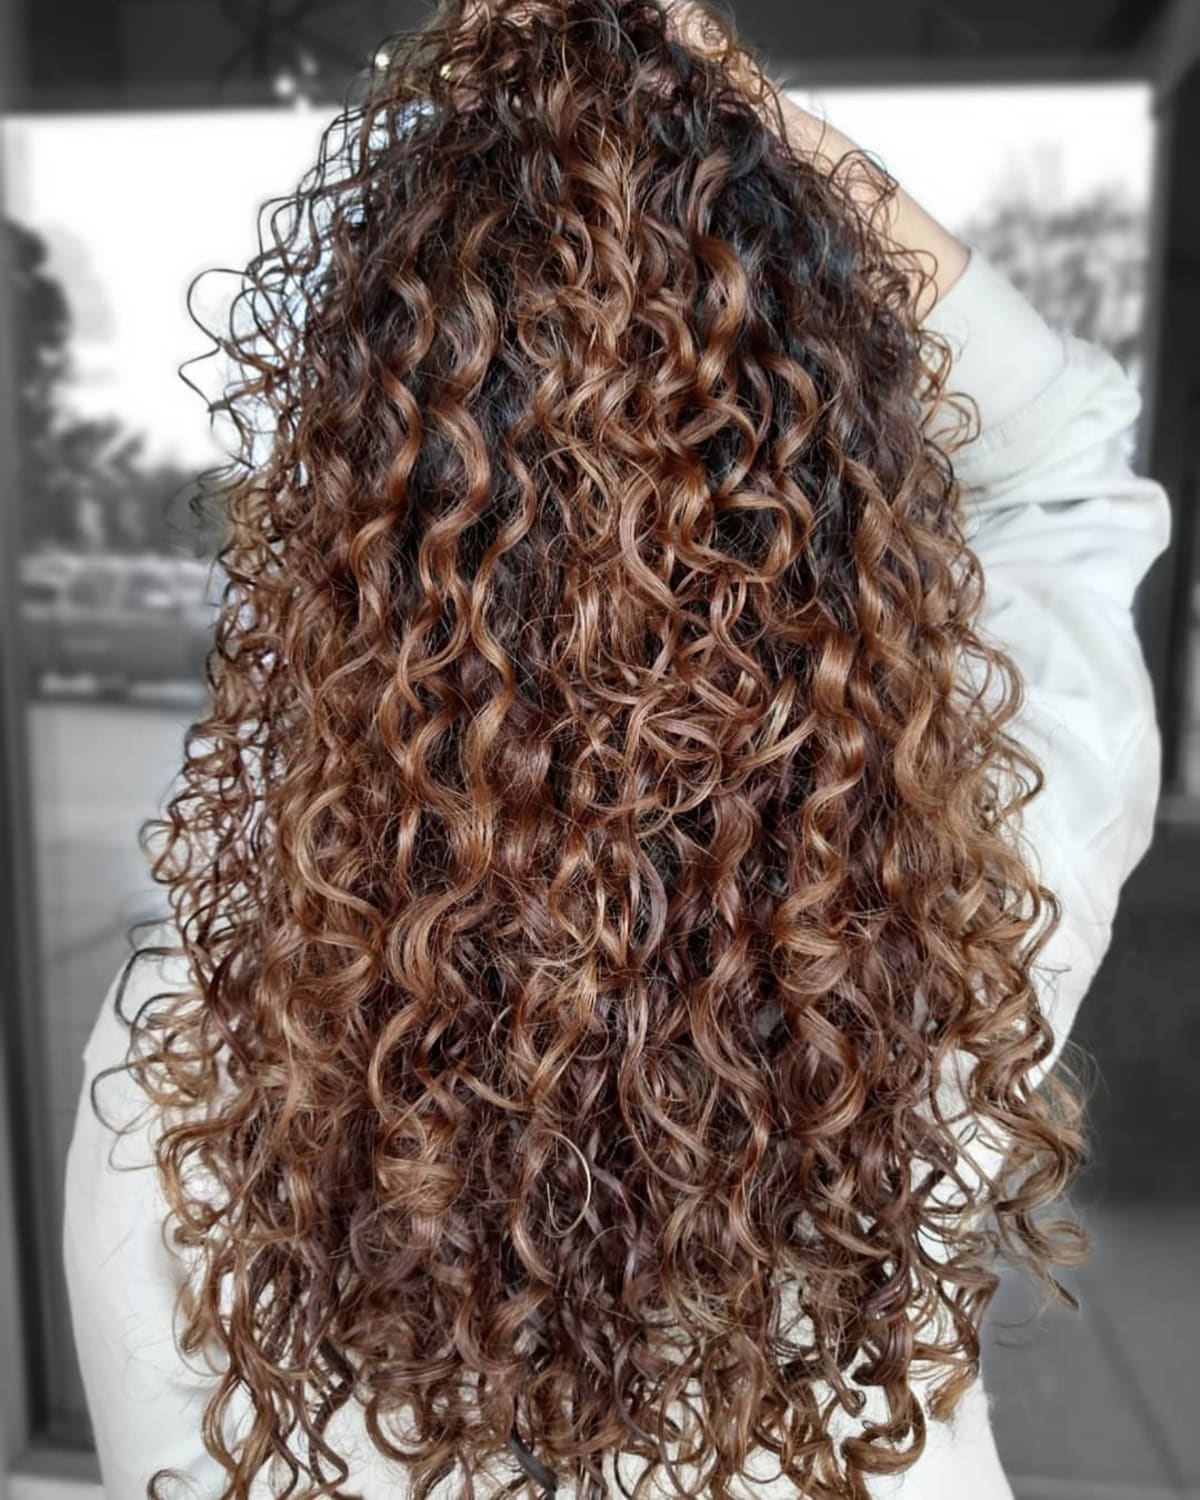 Rich brown balayage for natural curls